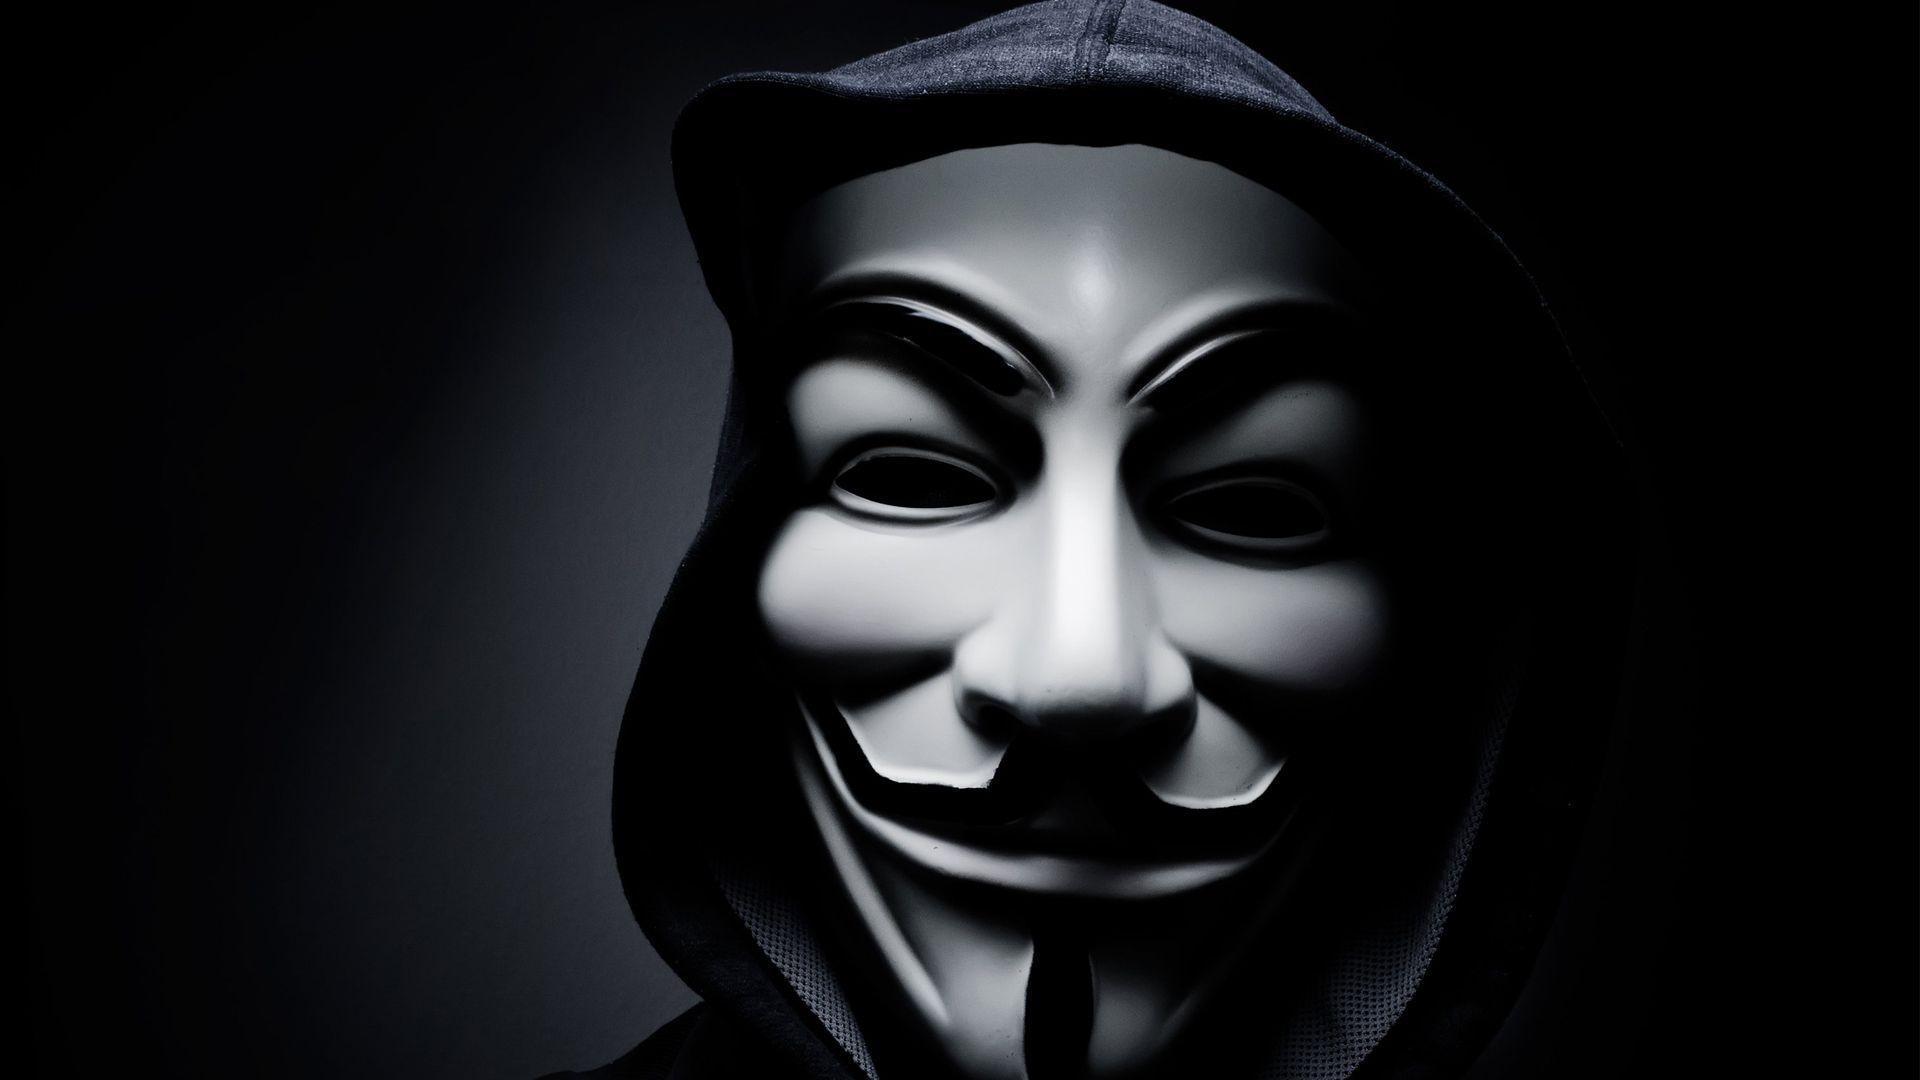 Cool iPhone 6s Wallpaper with Anonymous Mask. HD Wallpaper